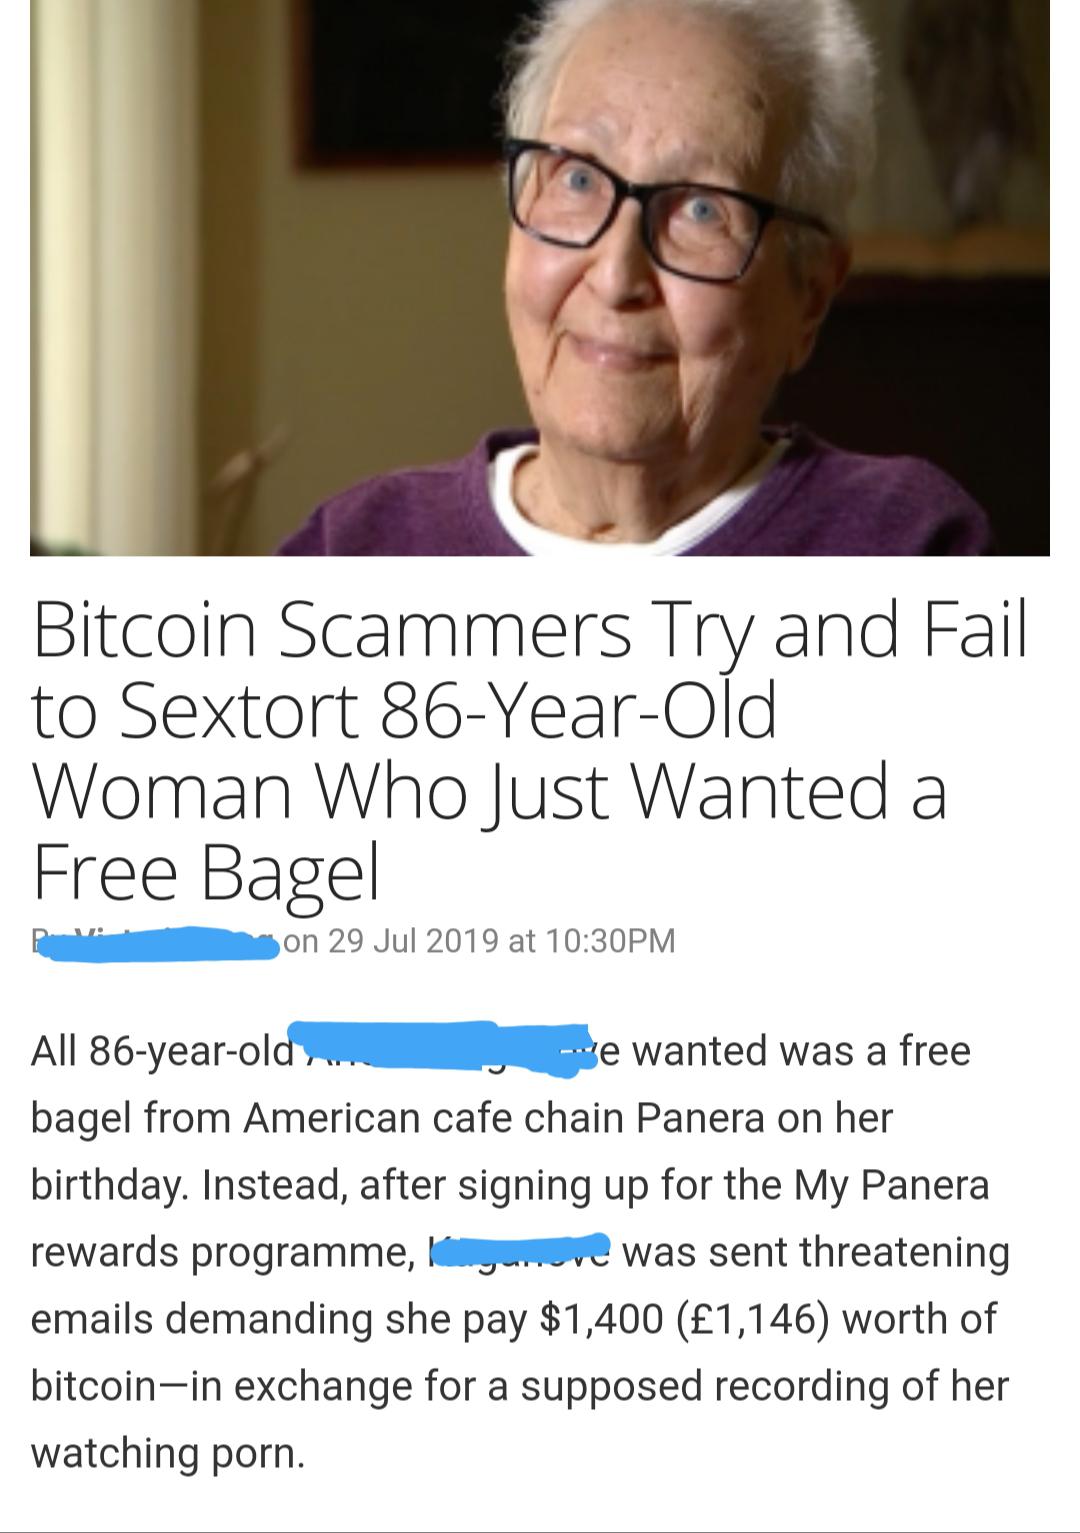 senior citizen - Bitcoin Scammers Try and Fail to Sextort 86YearOld Woman Who Just Wanted a Free Bagel son at Pm All 86yearold,.. we wanted was a free bagel from American cafe chain Panera on her birthday. Instead, after signing up for the My Panera rewar